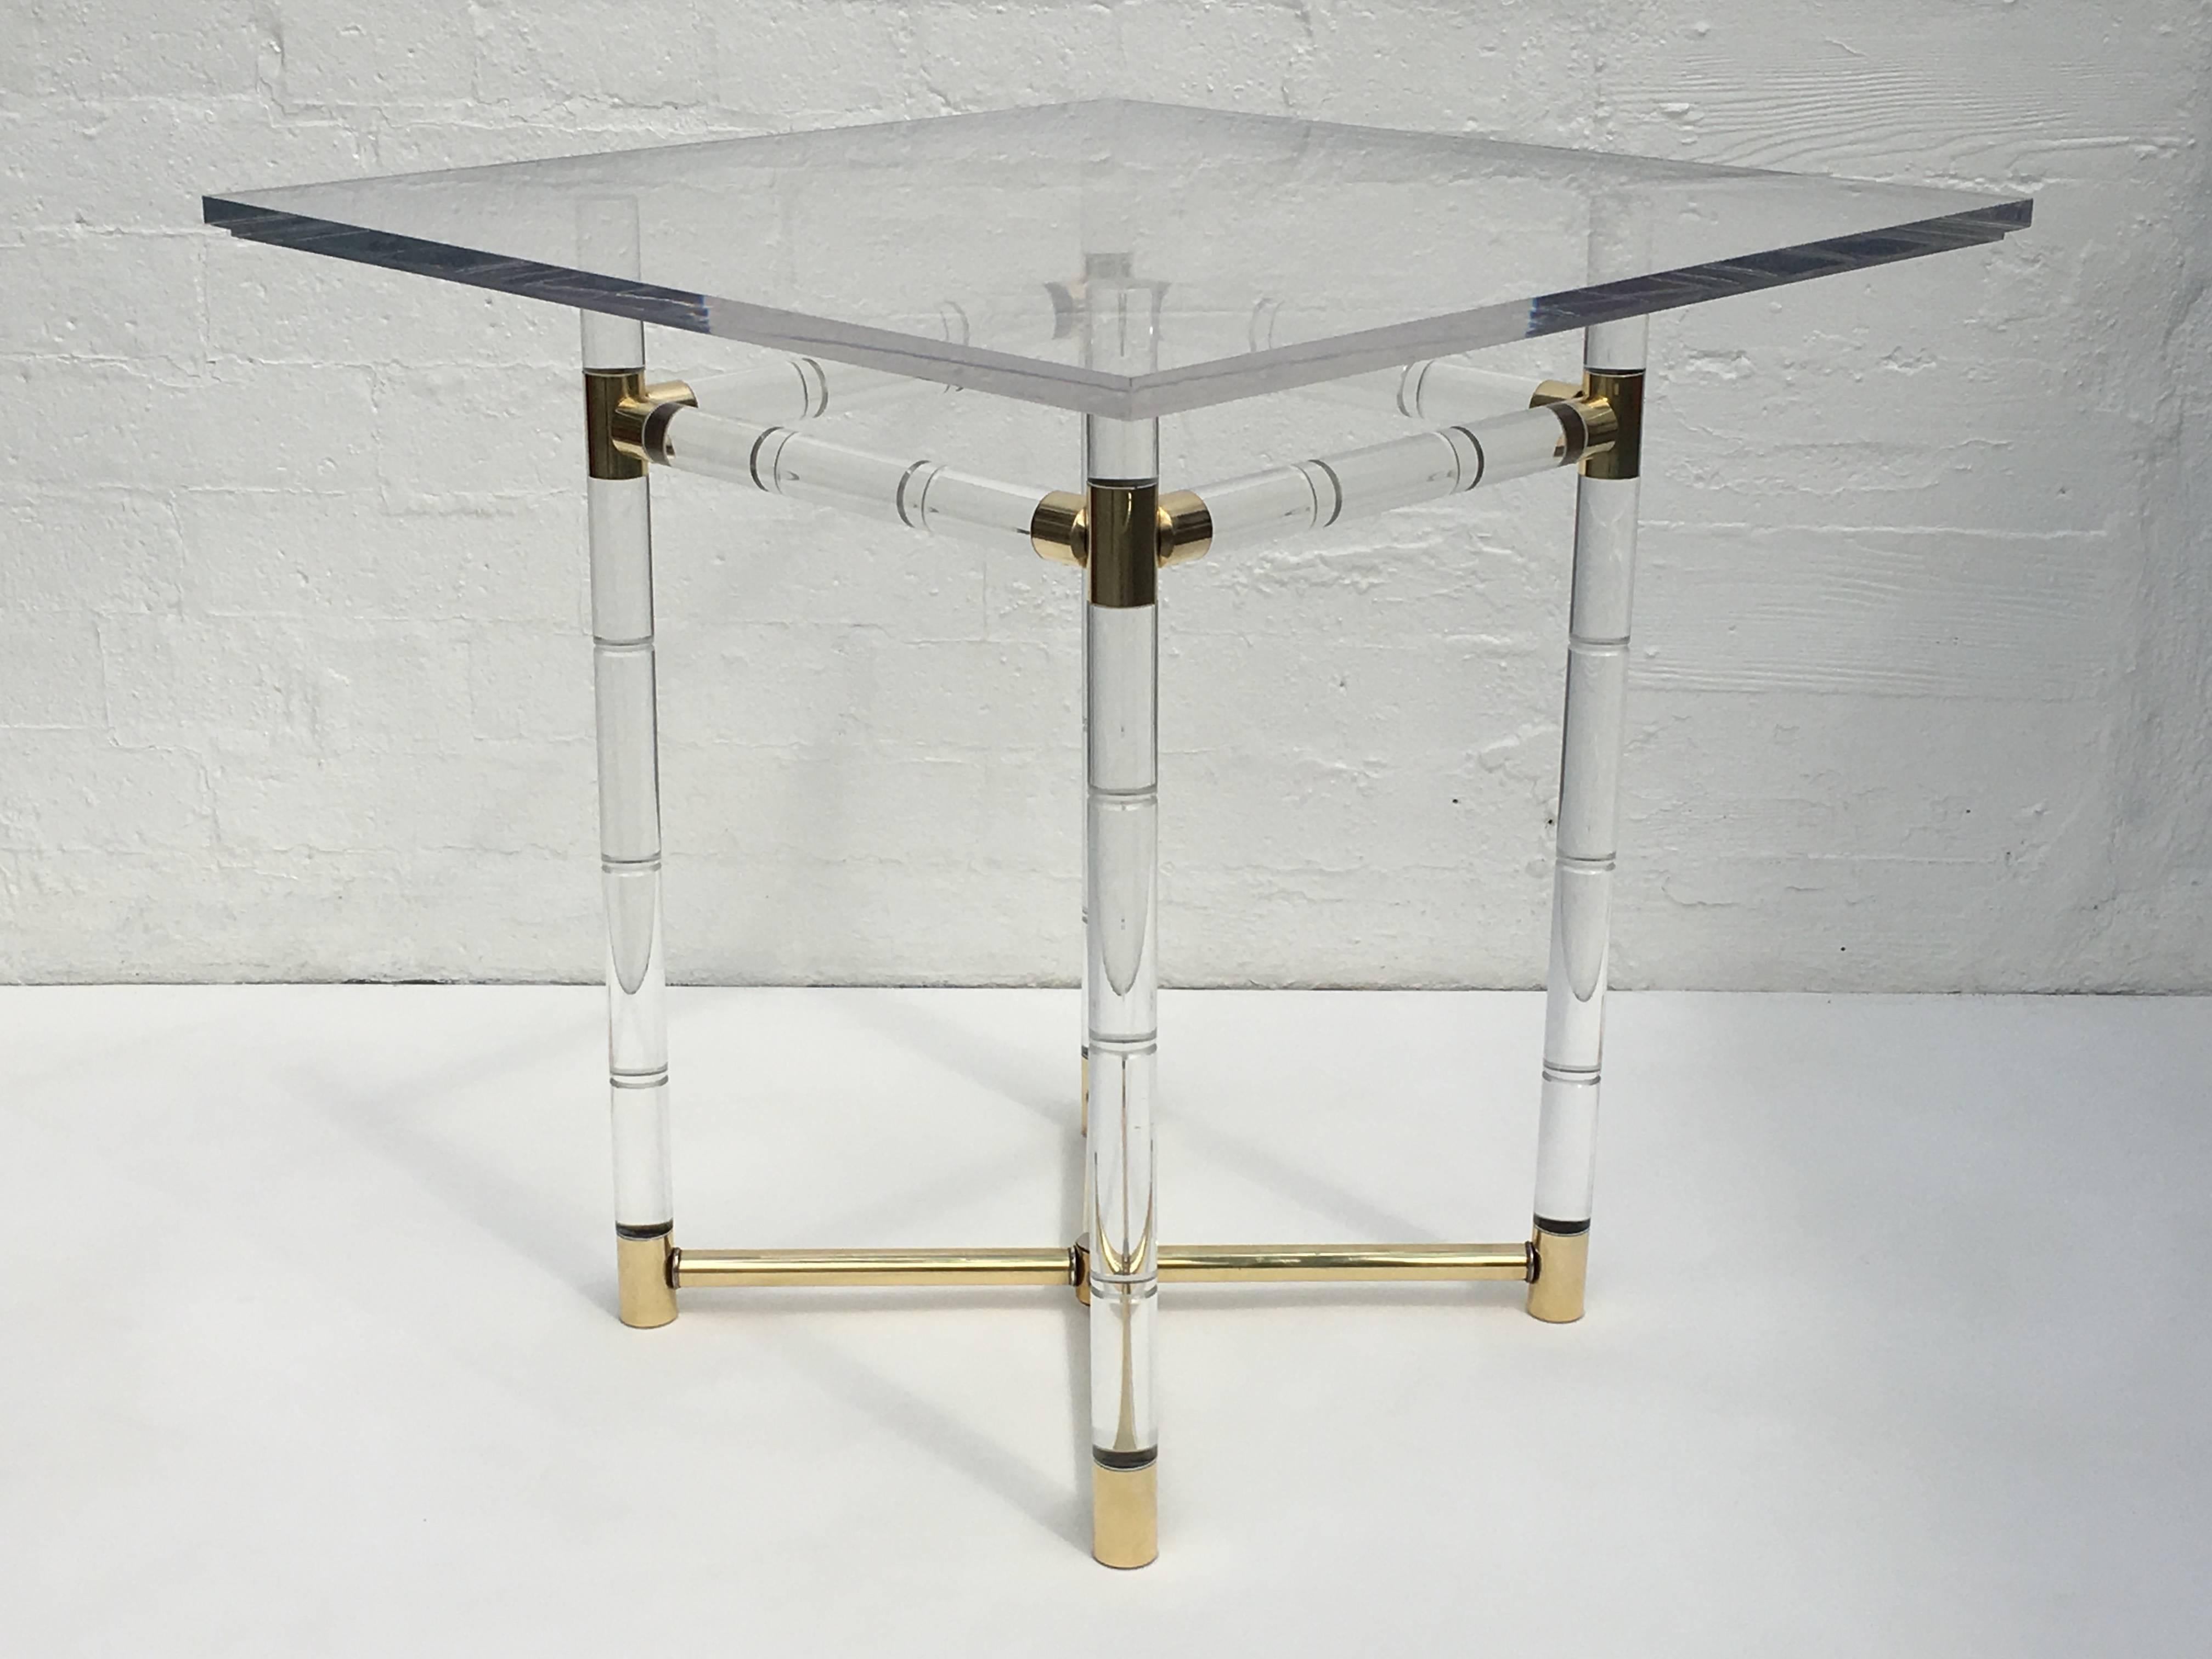 A glamorous brass and acrylic center table designed by Charles Hollis Jones in the 1960s. This is part of his